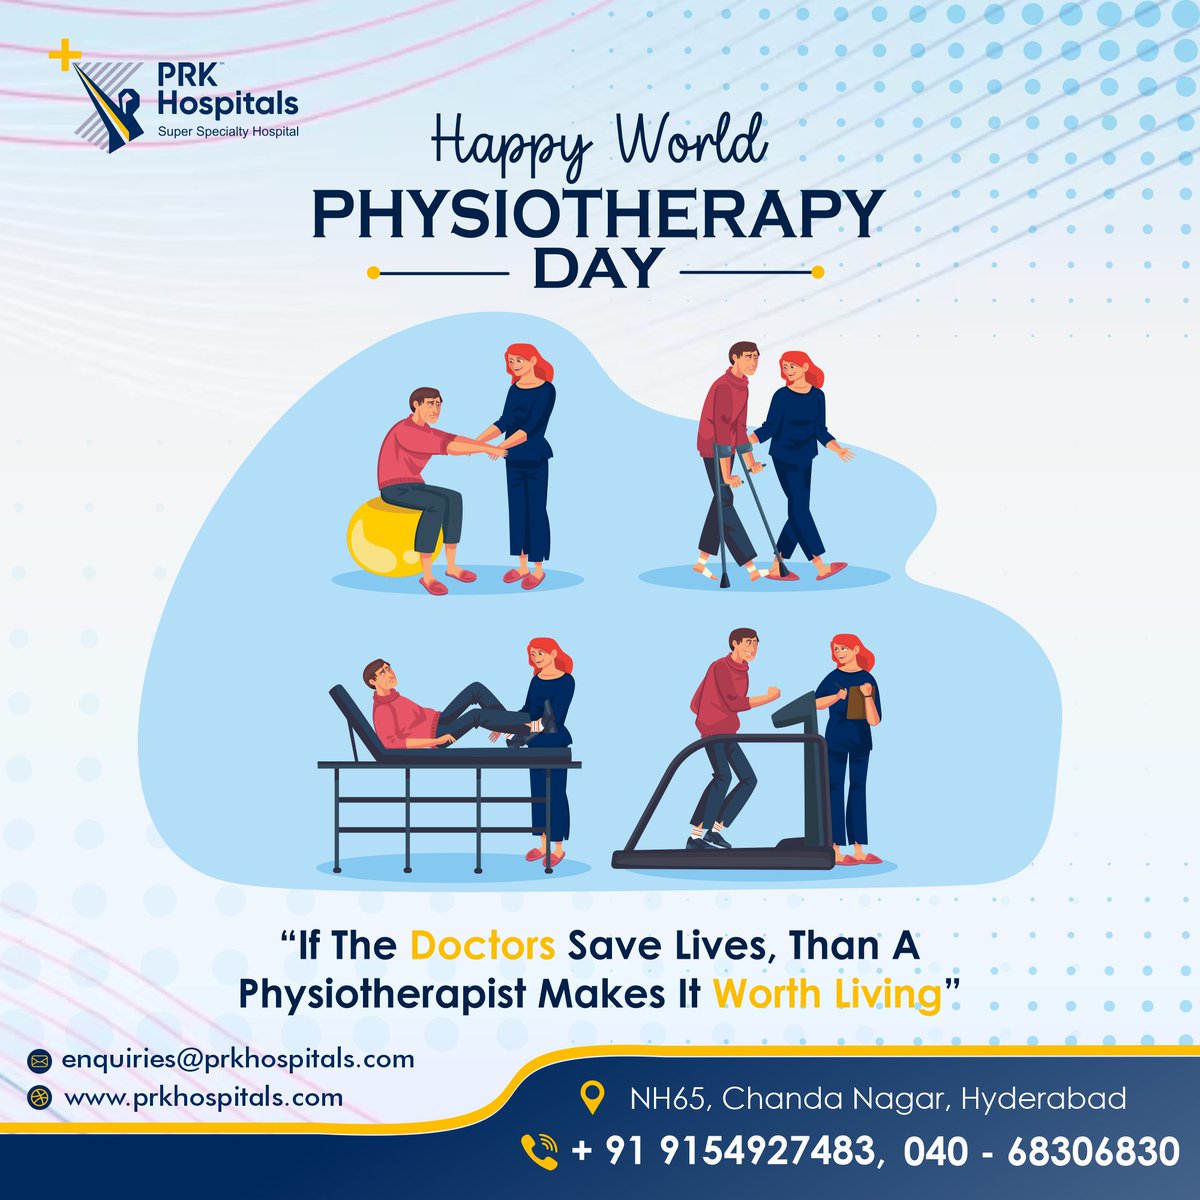 On the occasion of World Physiotherapy Day, Prk Hospitals honors and celebrates the contribution of our physiotherapists to society.

 #prkhospitals #prkhospitalshyderabad #worldphysiotherapyday #physiotherapycare #besthospitalforphysiotherapy #besthospitalnearme